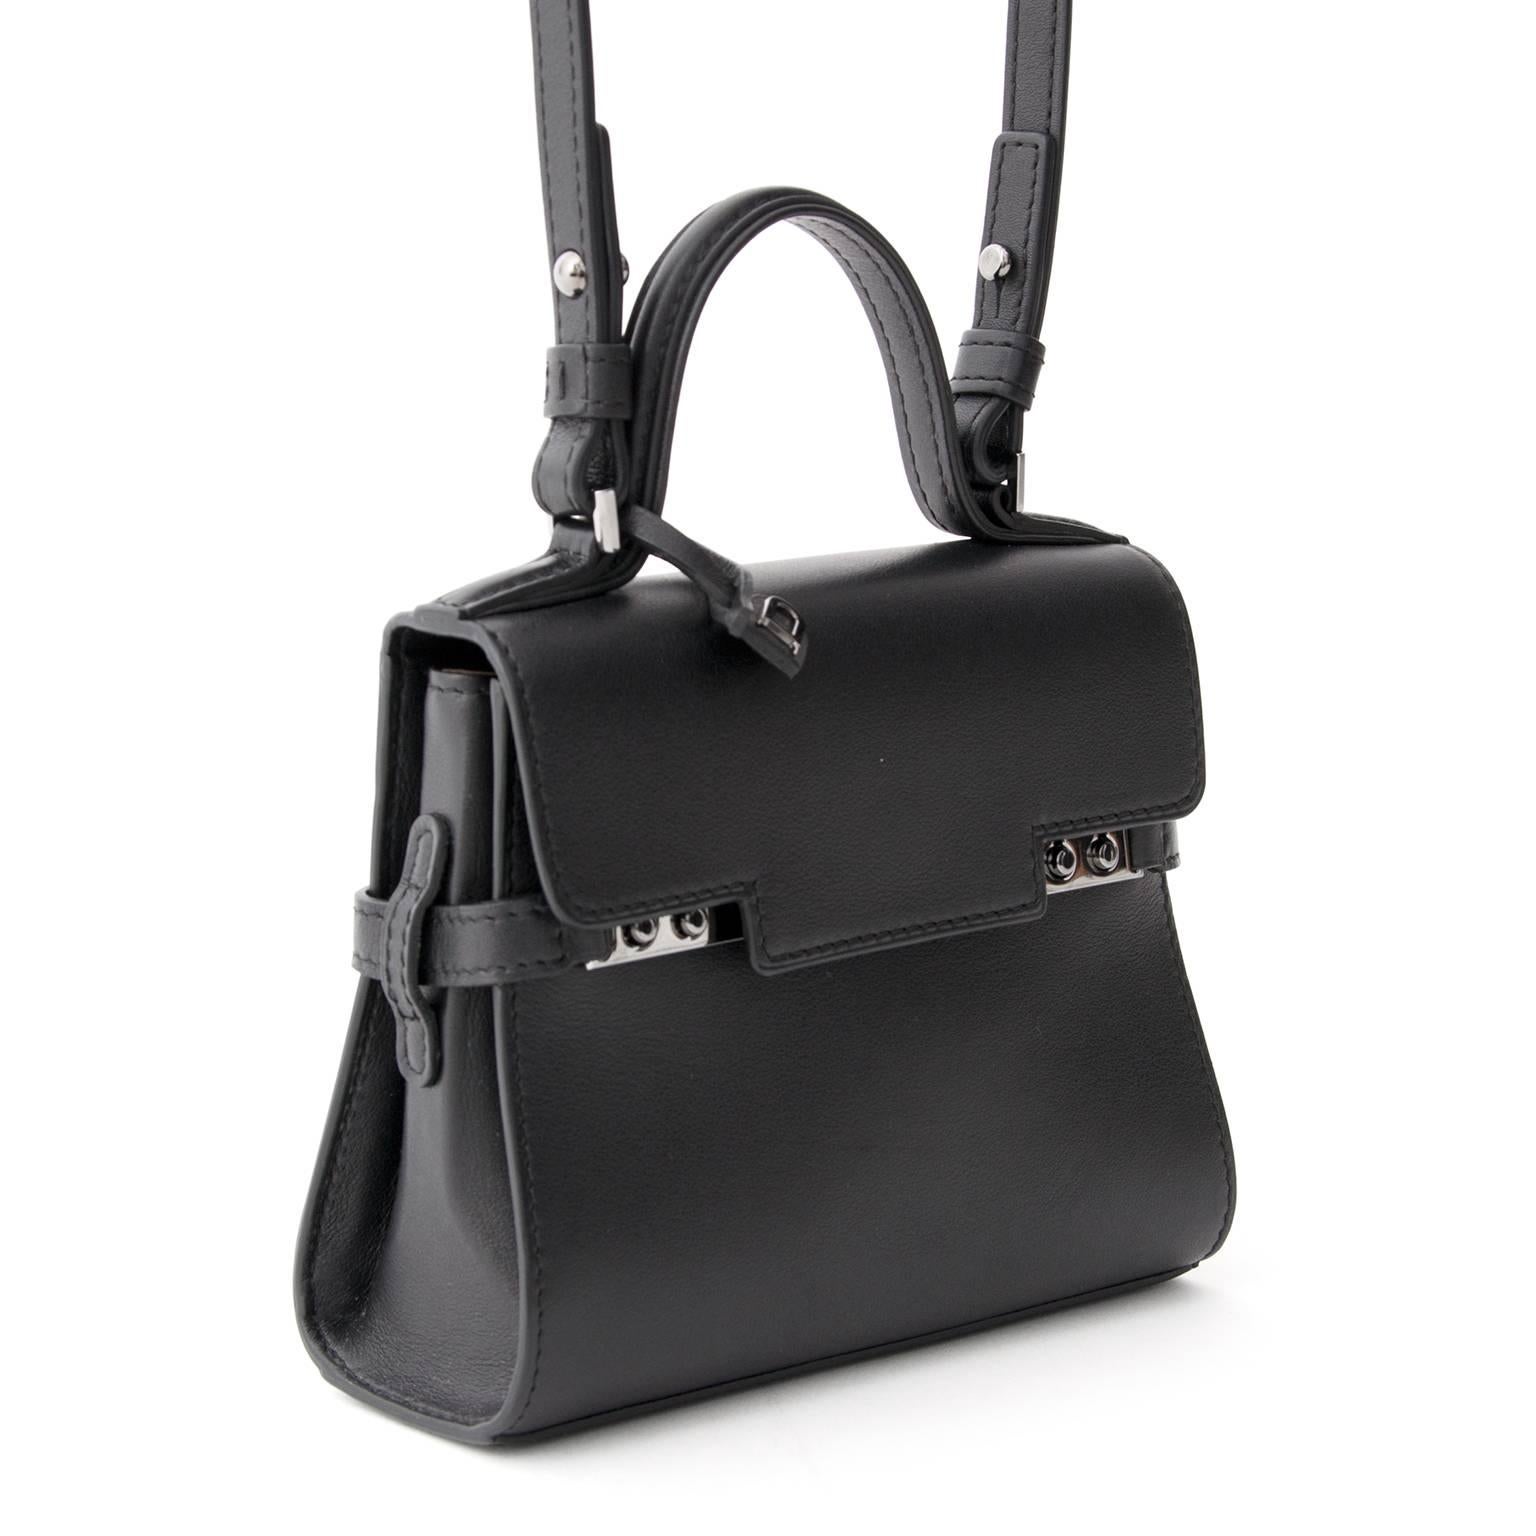 Brand new, storebought Delvaux Tempête Micro top handle bag with shoulder strap. 
Handmade in black 'Calf Souple' leather with dark silver-tone hardware. 
This clutch sized edition of Delvaux' timeless classic Tempête bag simply looks exquisite